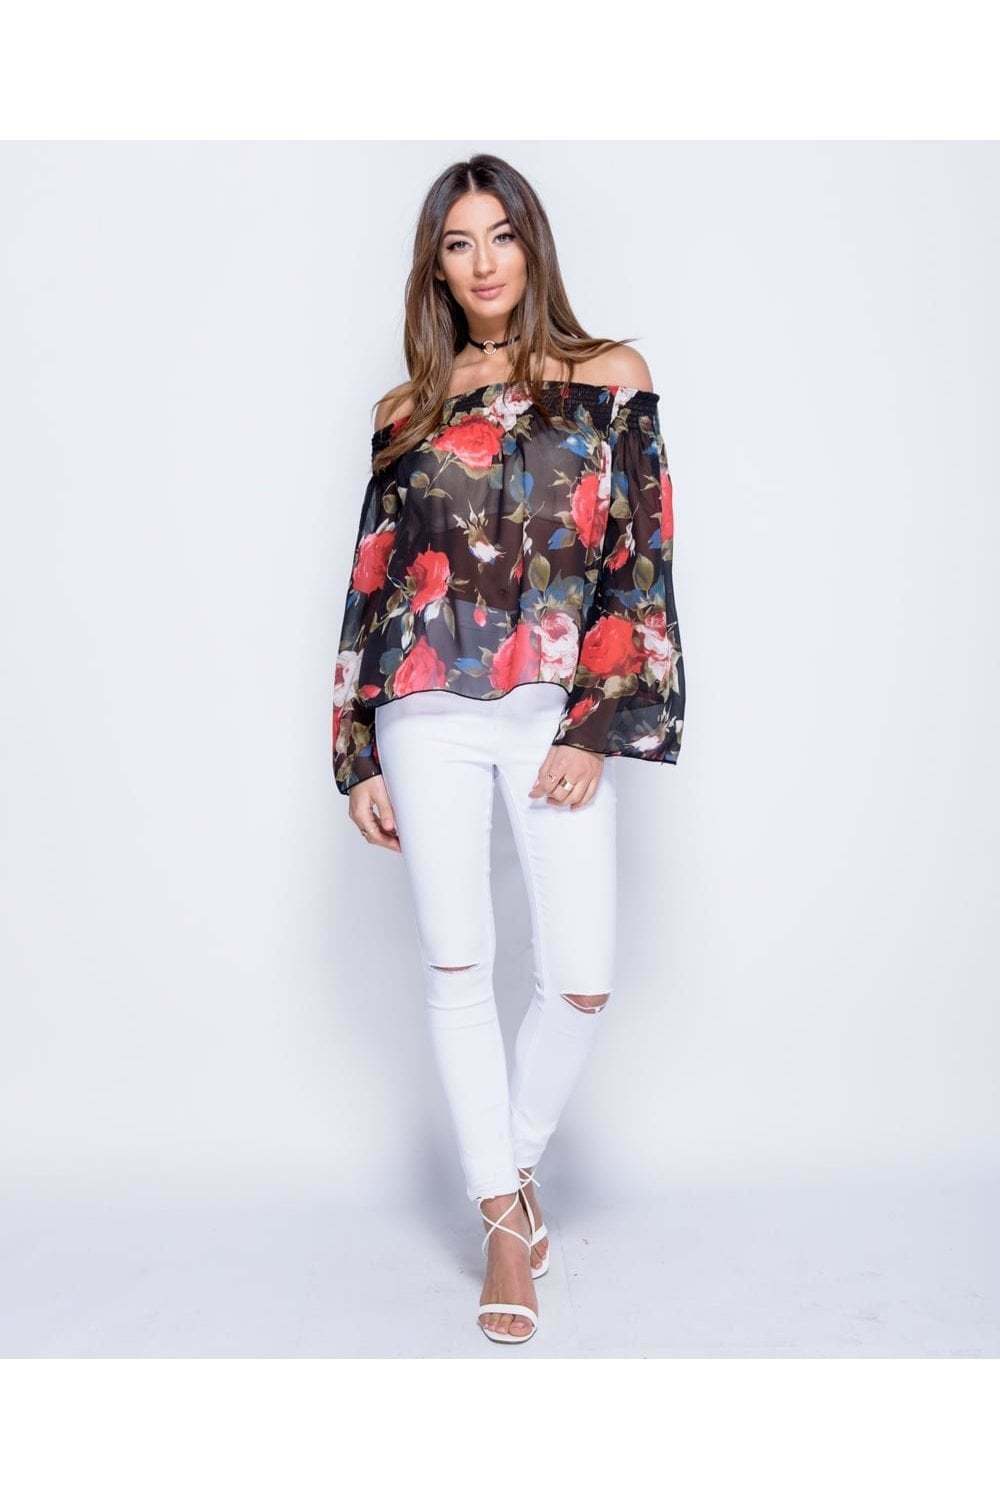 Rose Print Flare Sleeve Bardot Top in Black - Full Front View